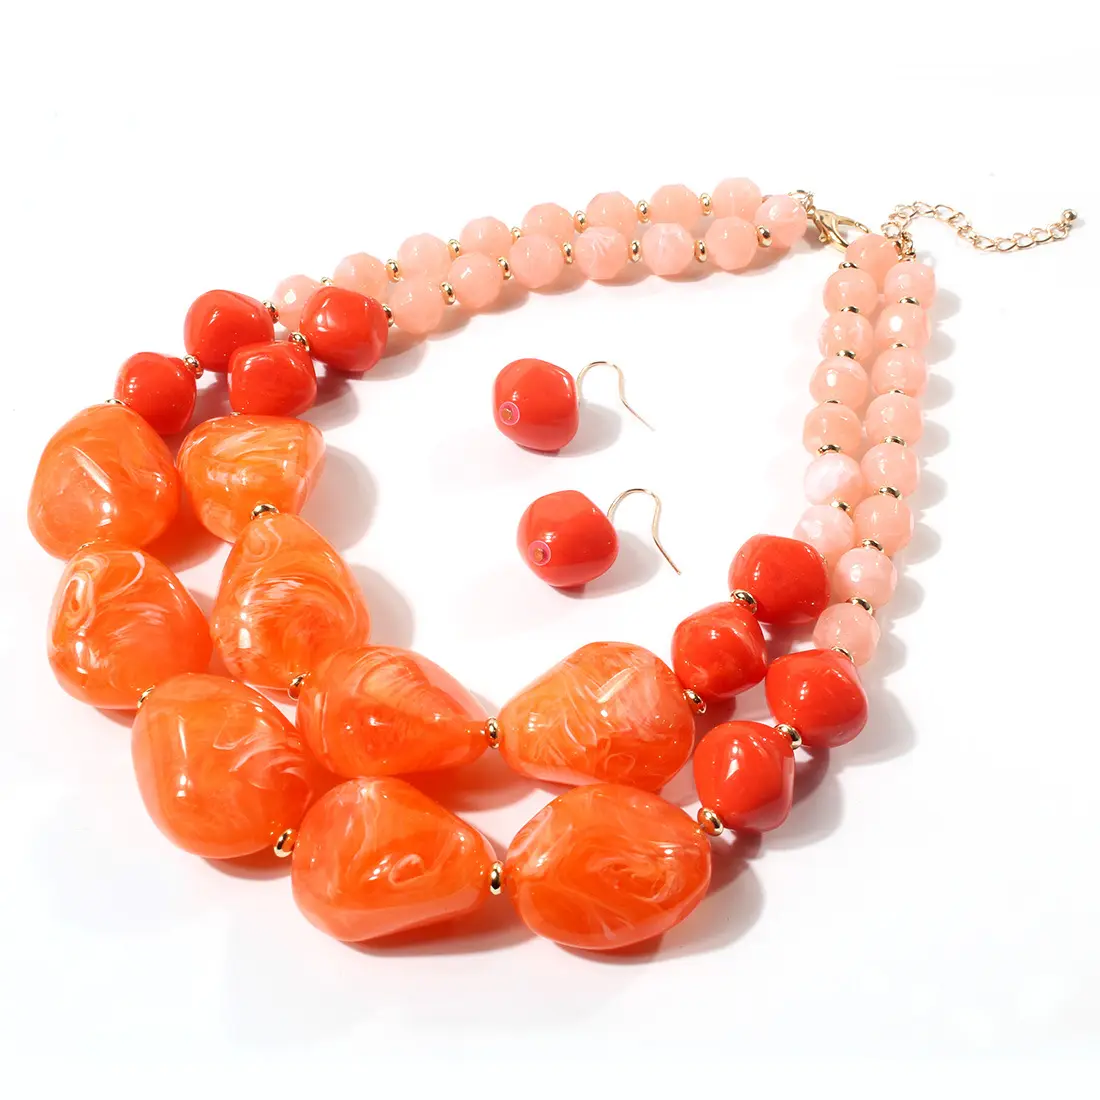 Yiwu DAICY dainty boho necklace colorful resin necklace chunky big beaded layered necklace exaggerate statement jewelry women